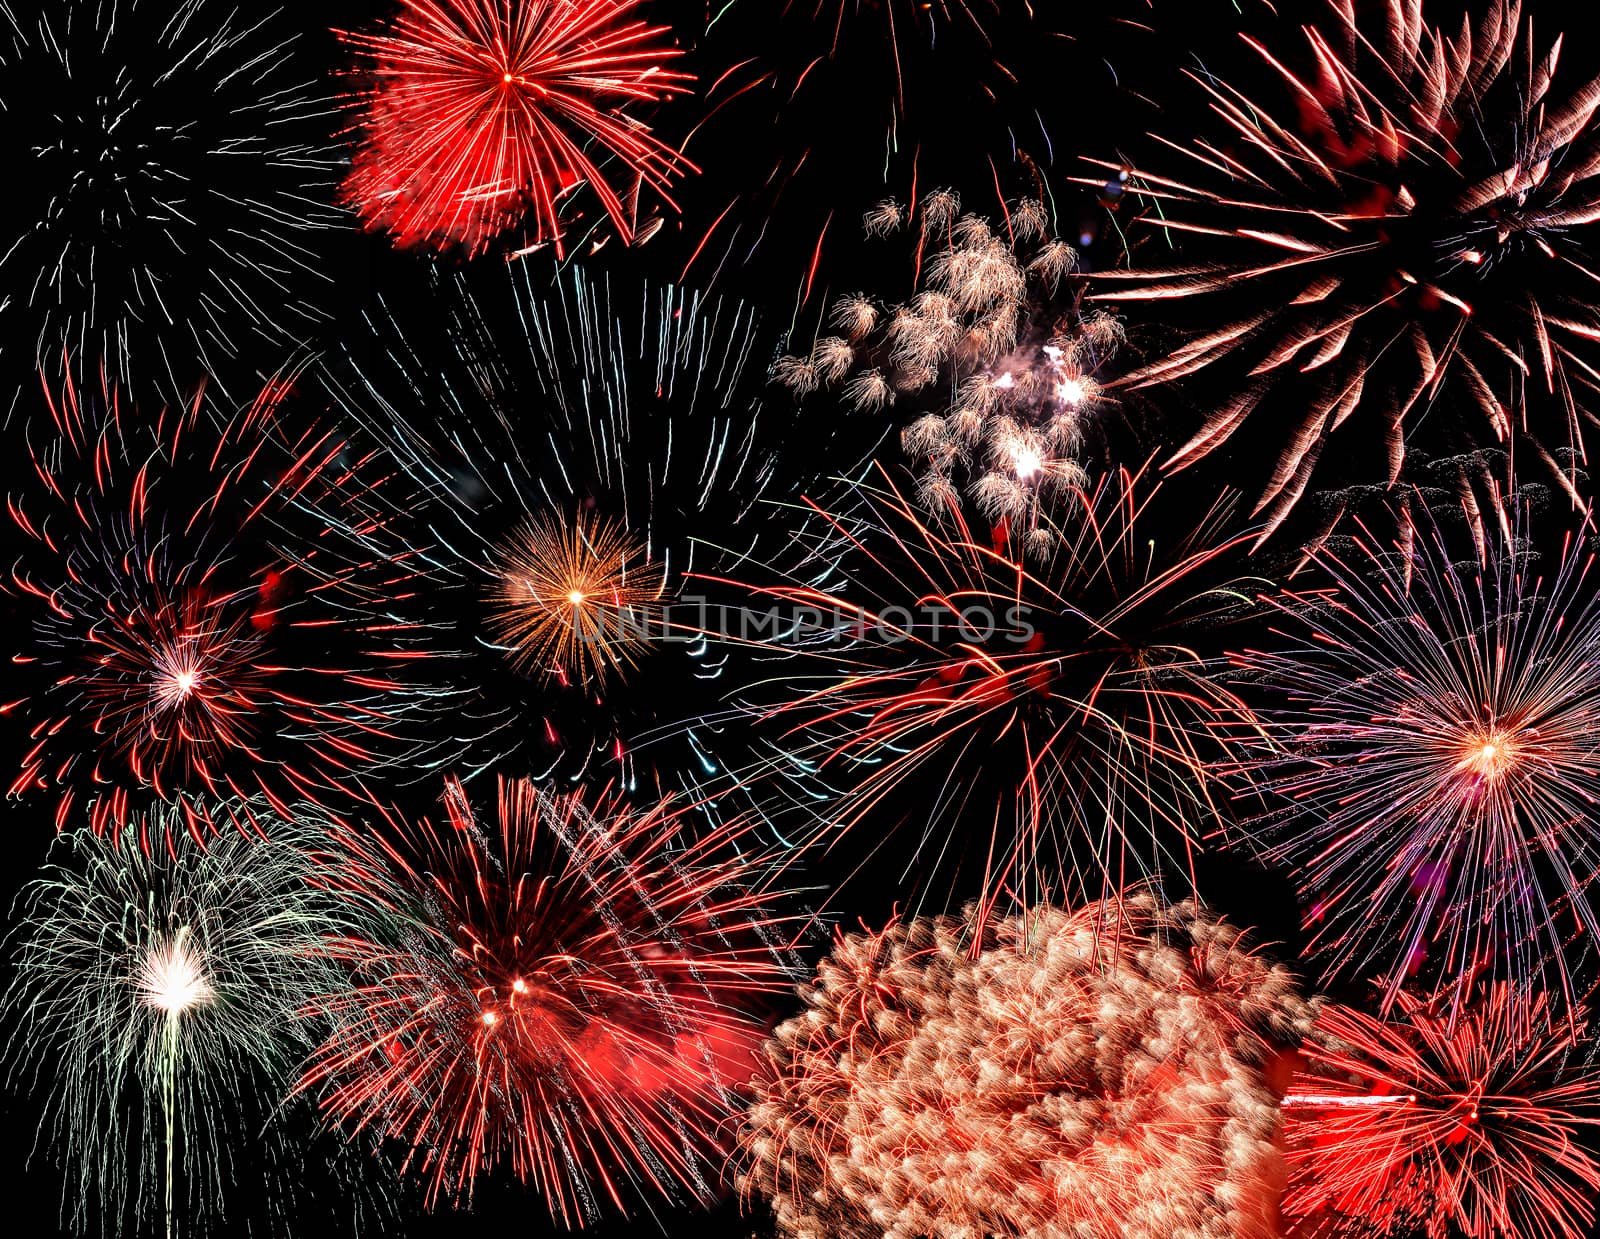 Montage of several New Year's fireworks in the night sky